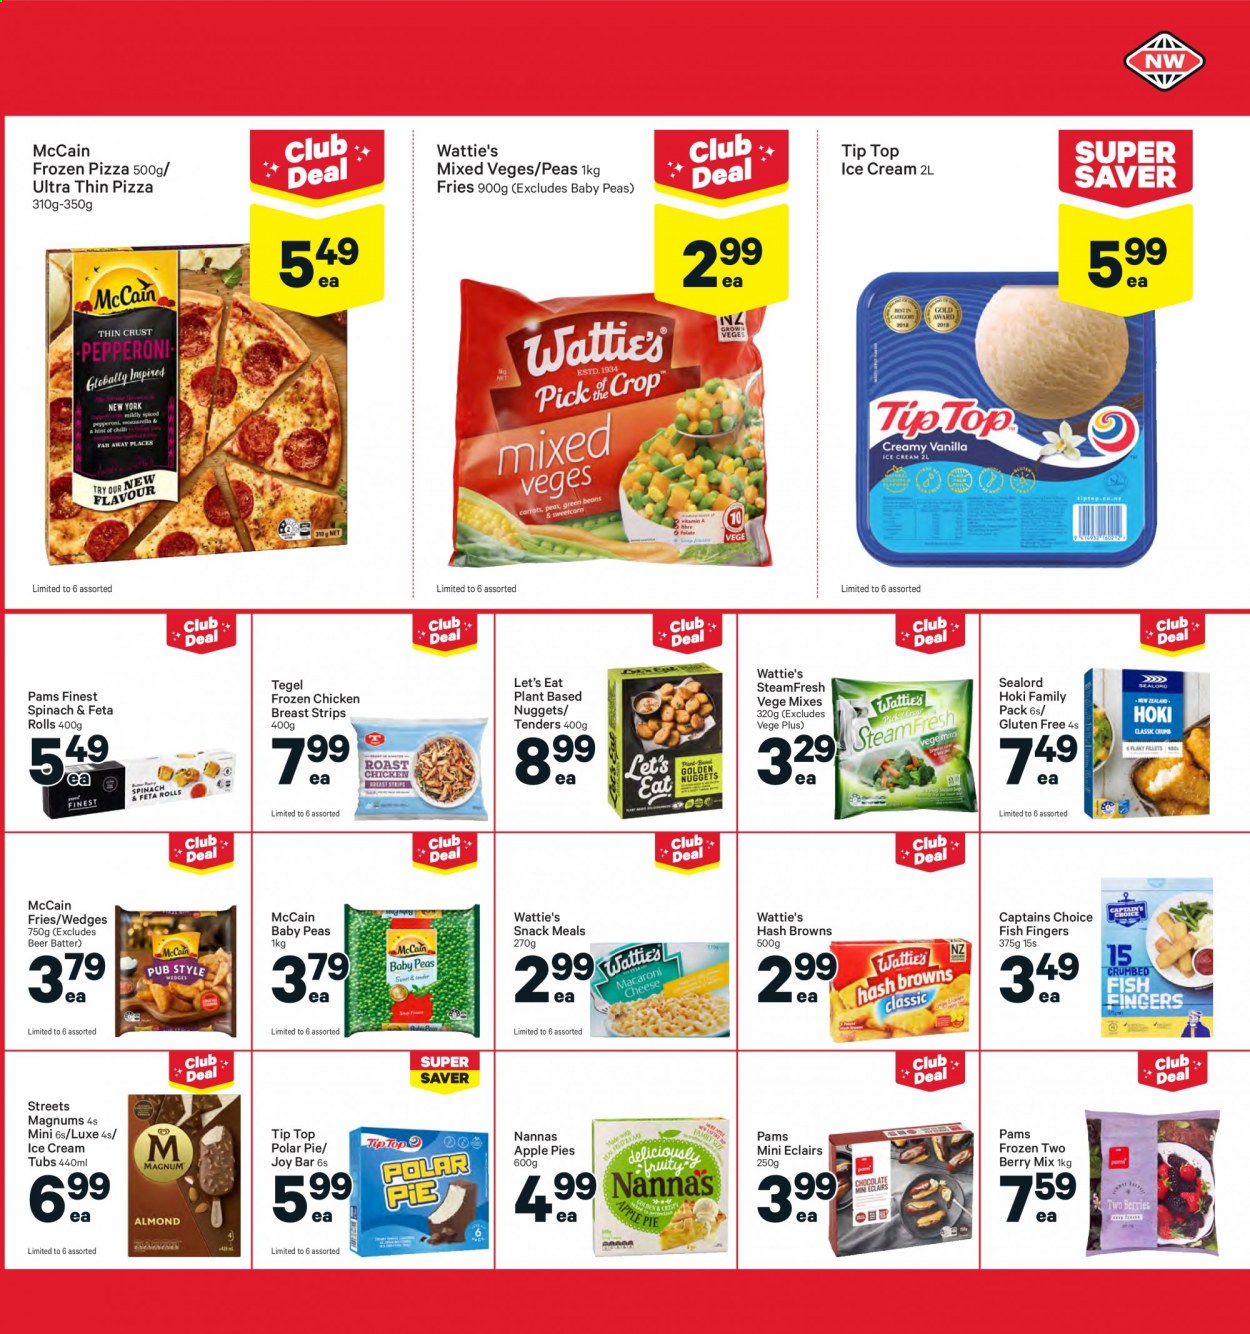 thumbnail - New World mailer - 16.08.2021 - 22.08.2021 - Sales products - pie, Tip Top, apple pie, beans, green beans, peas, fish, Sealord, hoki fish, fish fingers, fish sticks, pizza, chicken roast, nuggets, Wattie's, pepperoni, Magnum, ice cream, Joy Bar, strips, McCain, hash browns, potato fries, snack, beer, far away. Page 23.